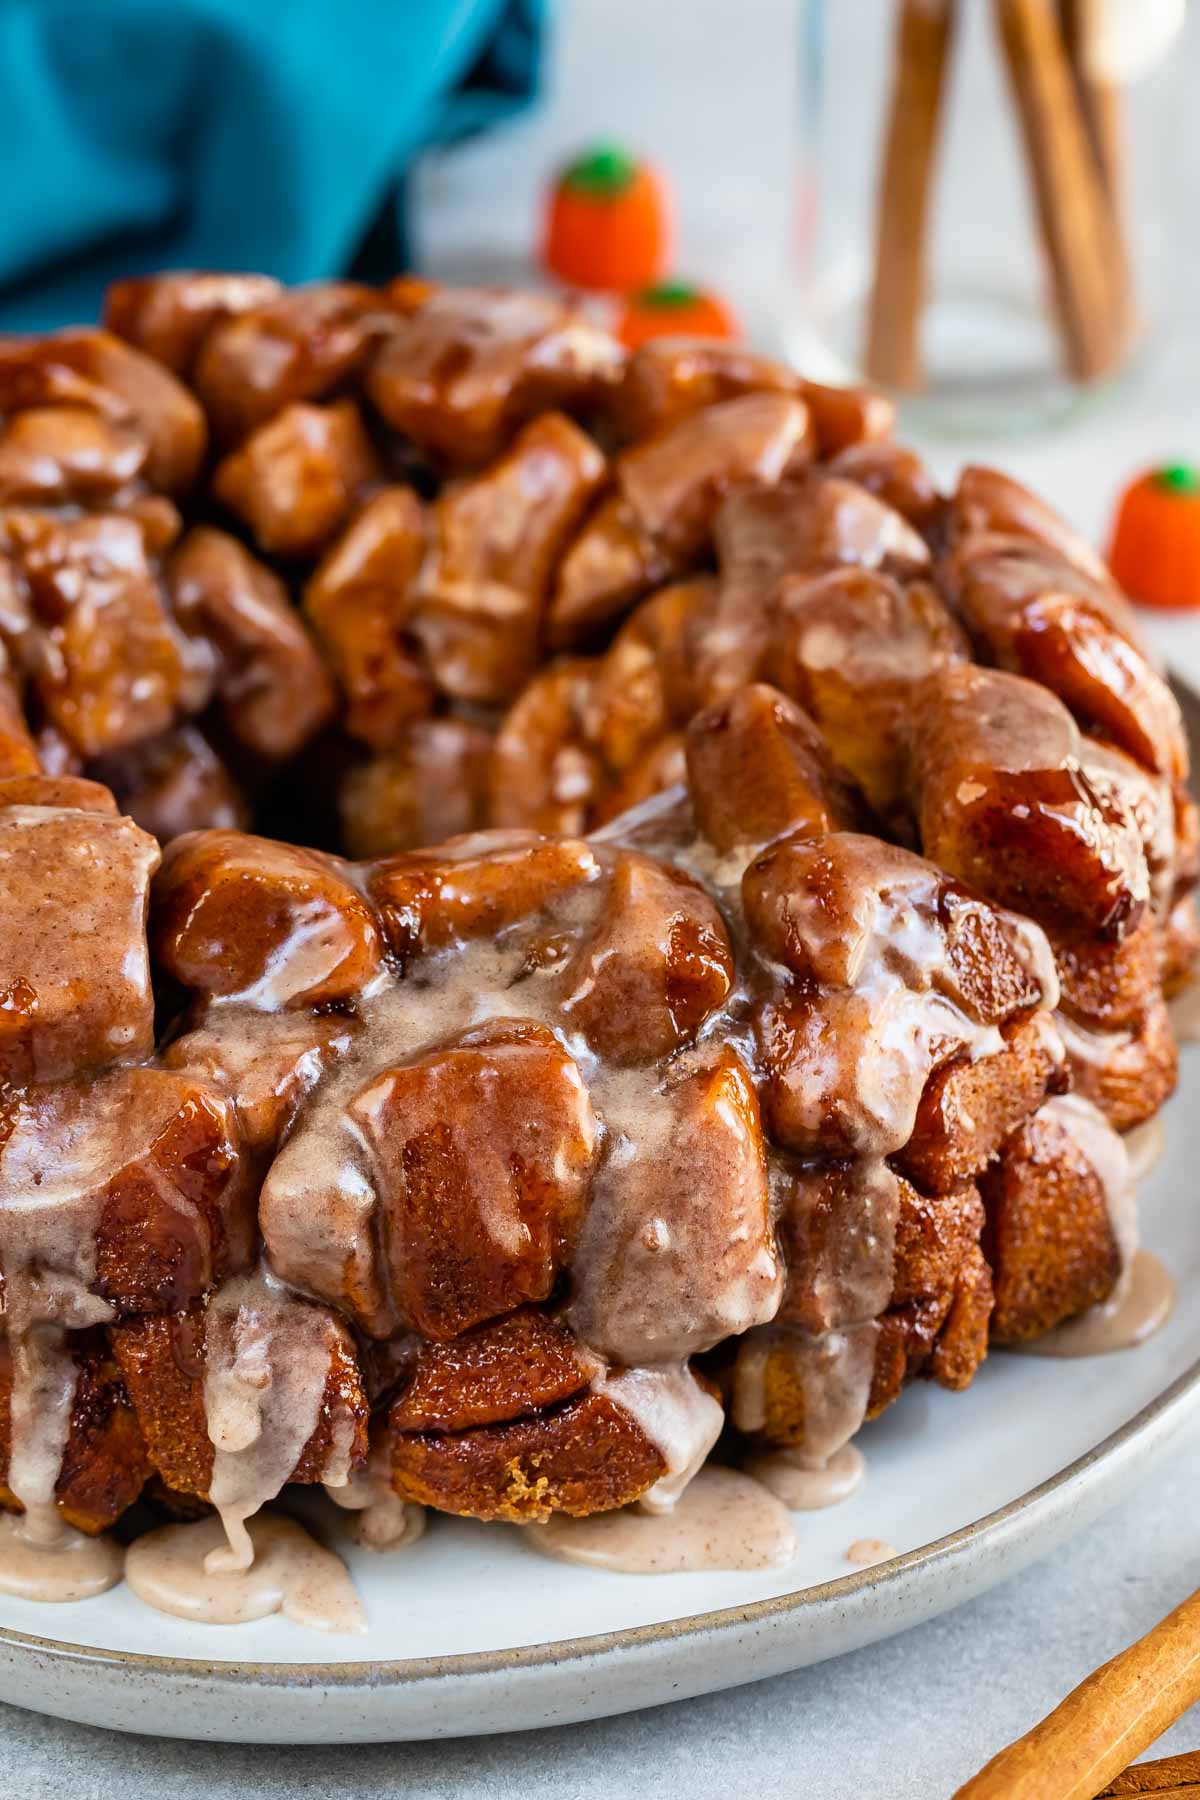 monkey bread on a grey plate with icing dripped over the top.